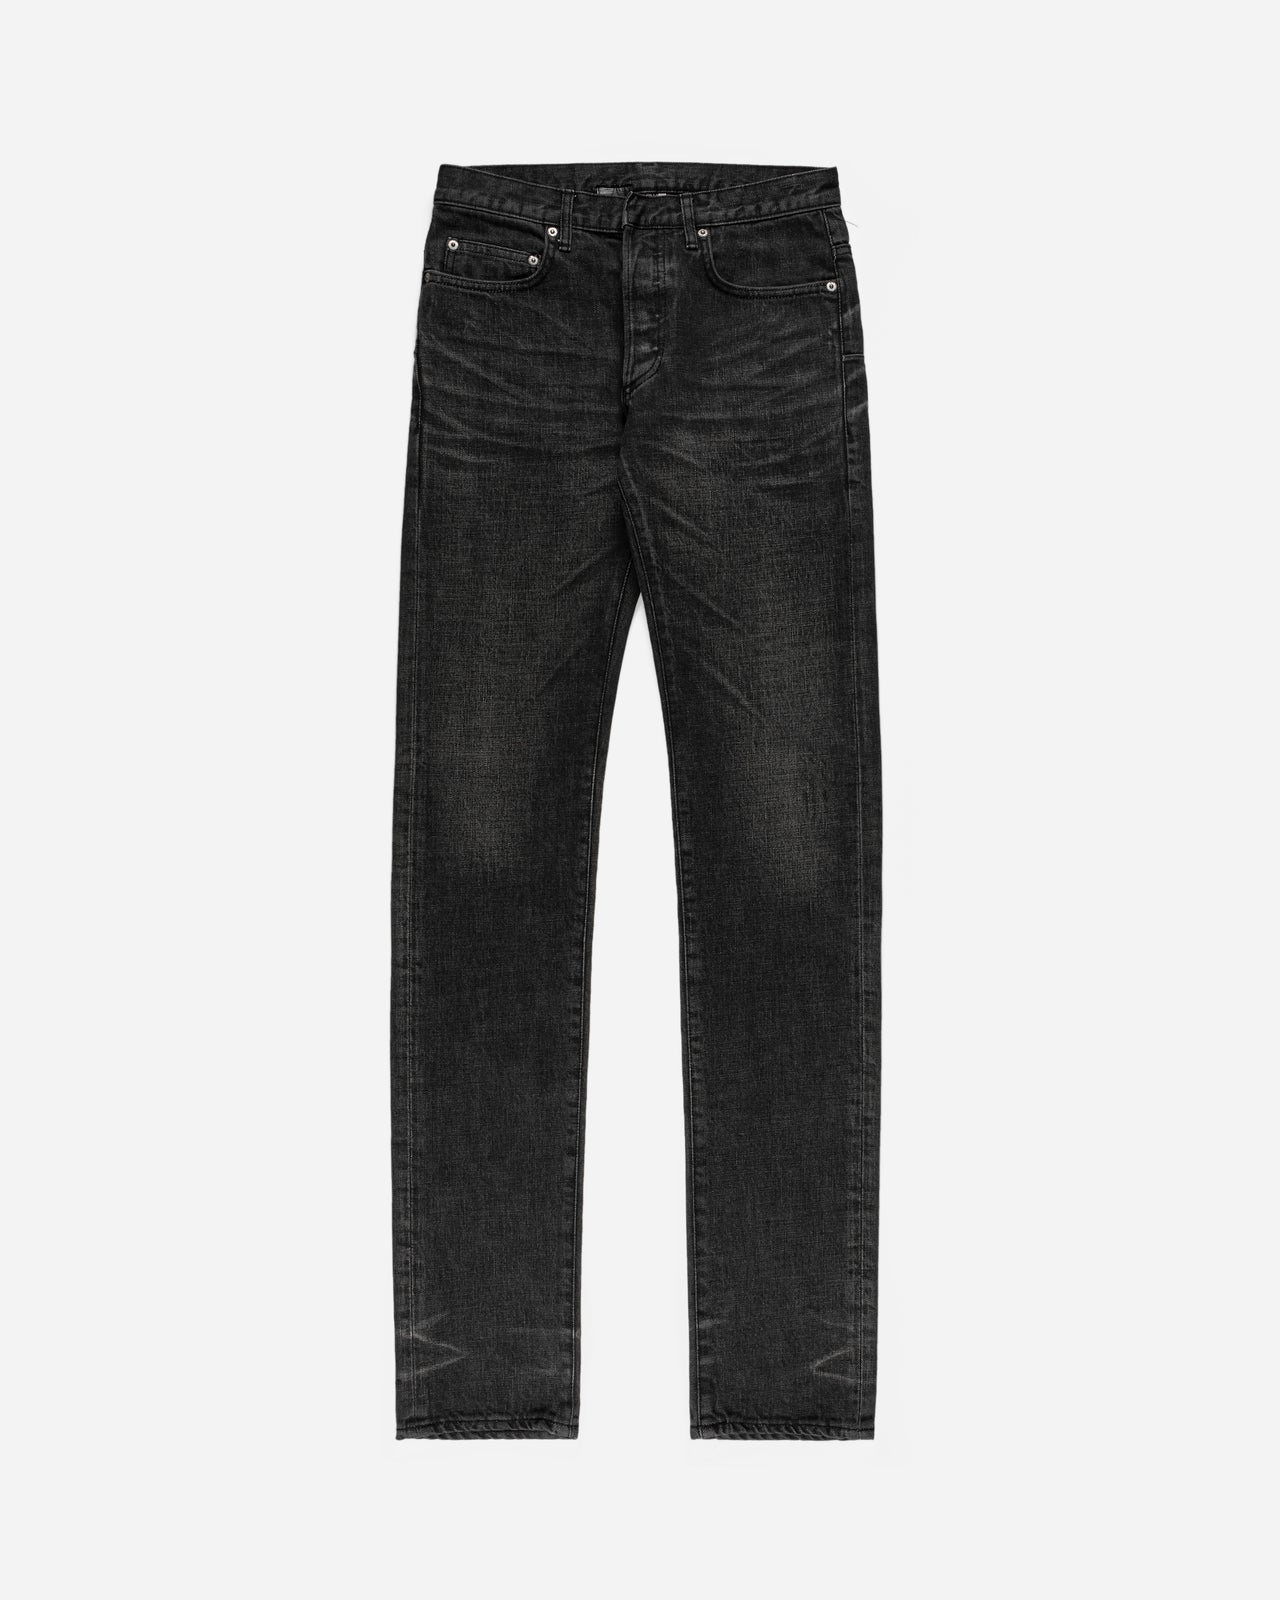 Dior Homme Charcoal Claw Mark Jeans - SS08